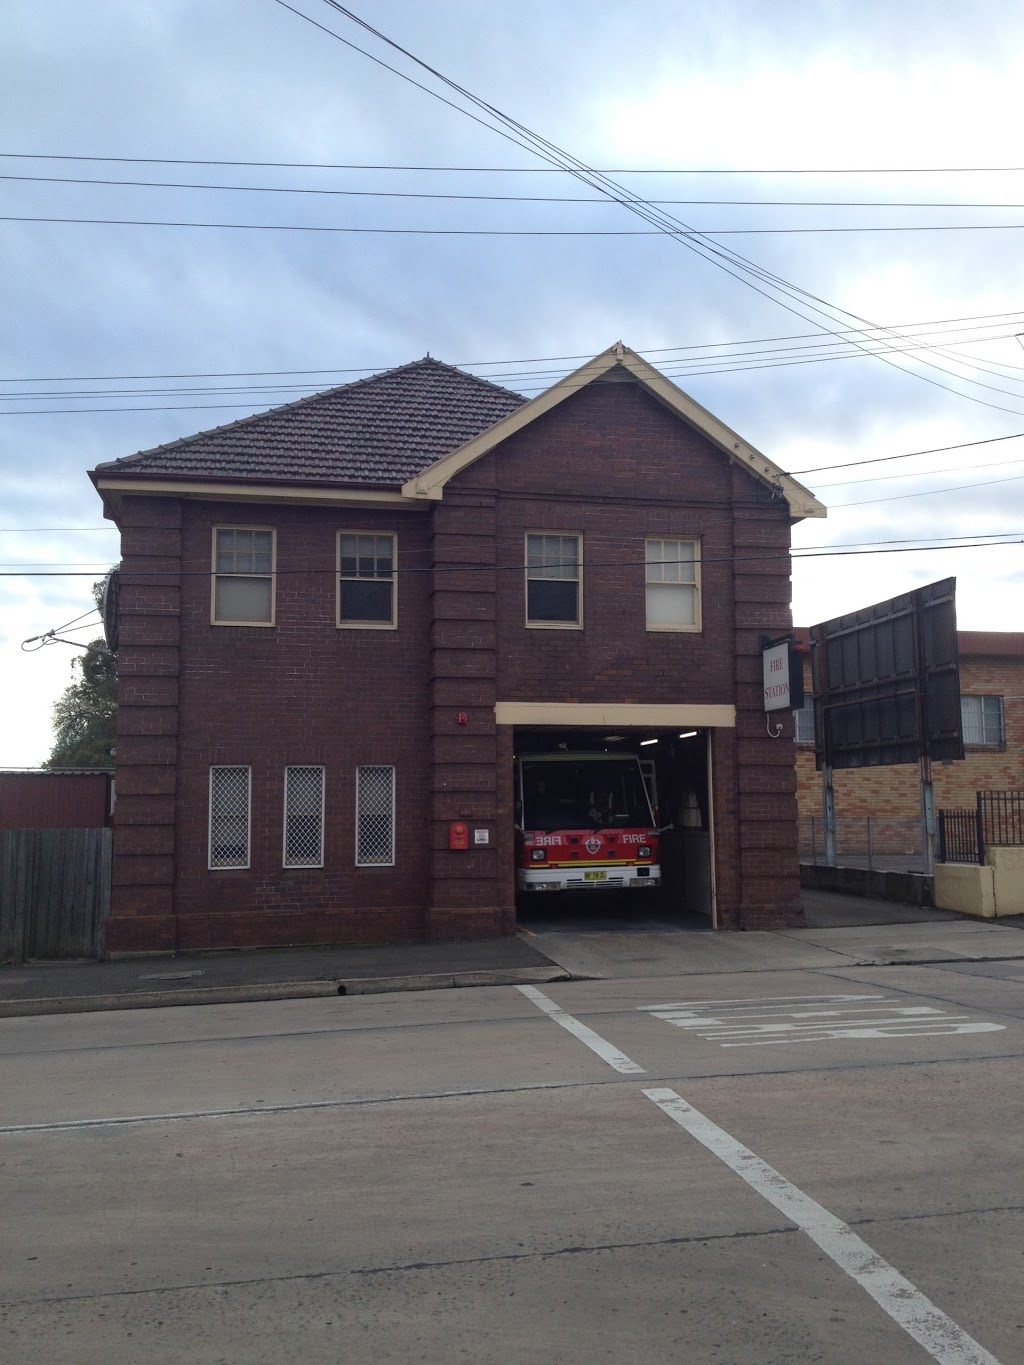 Fire and Rescue NSW Guildford Fire Station | 263 Guildford Rd, Guildford NSW 2161, Australia | Phone: (02) 9632 6856